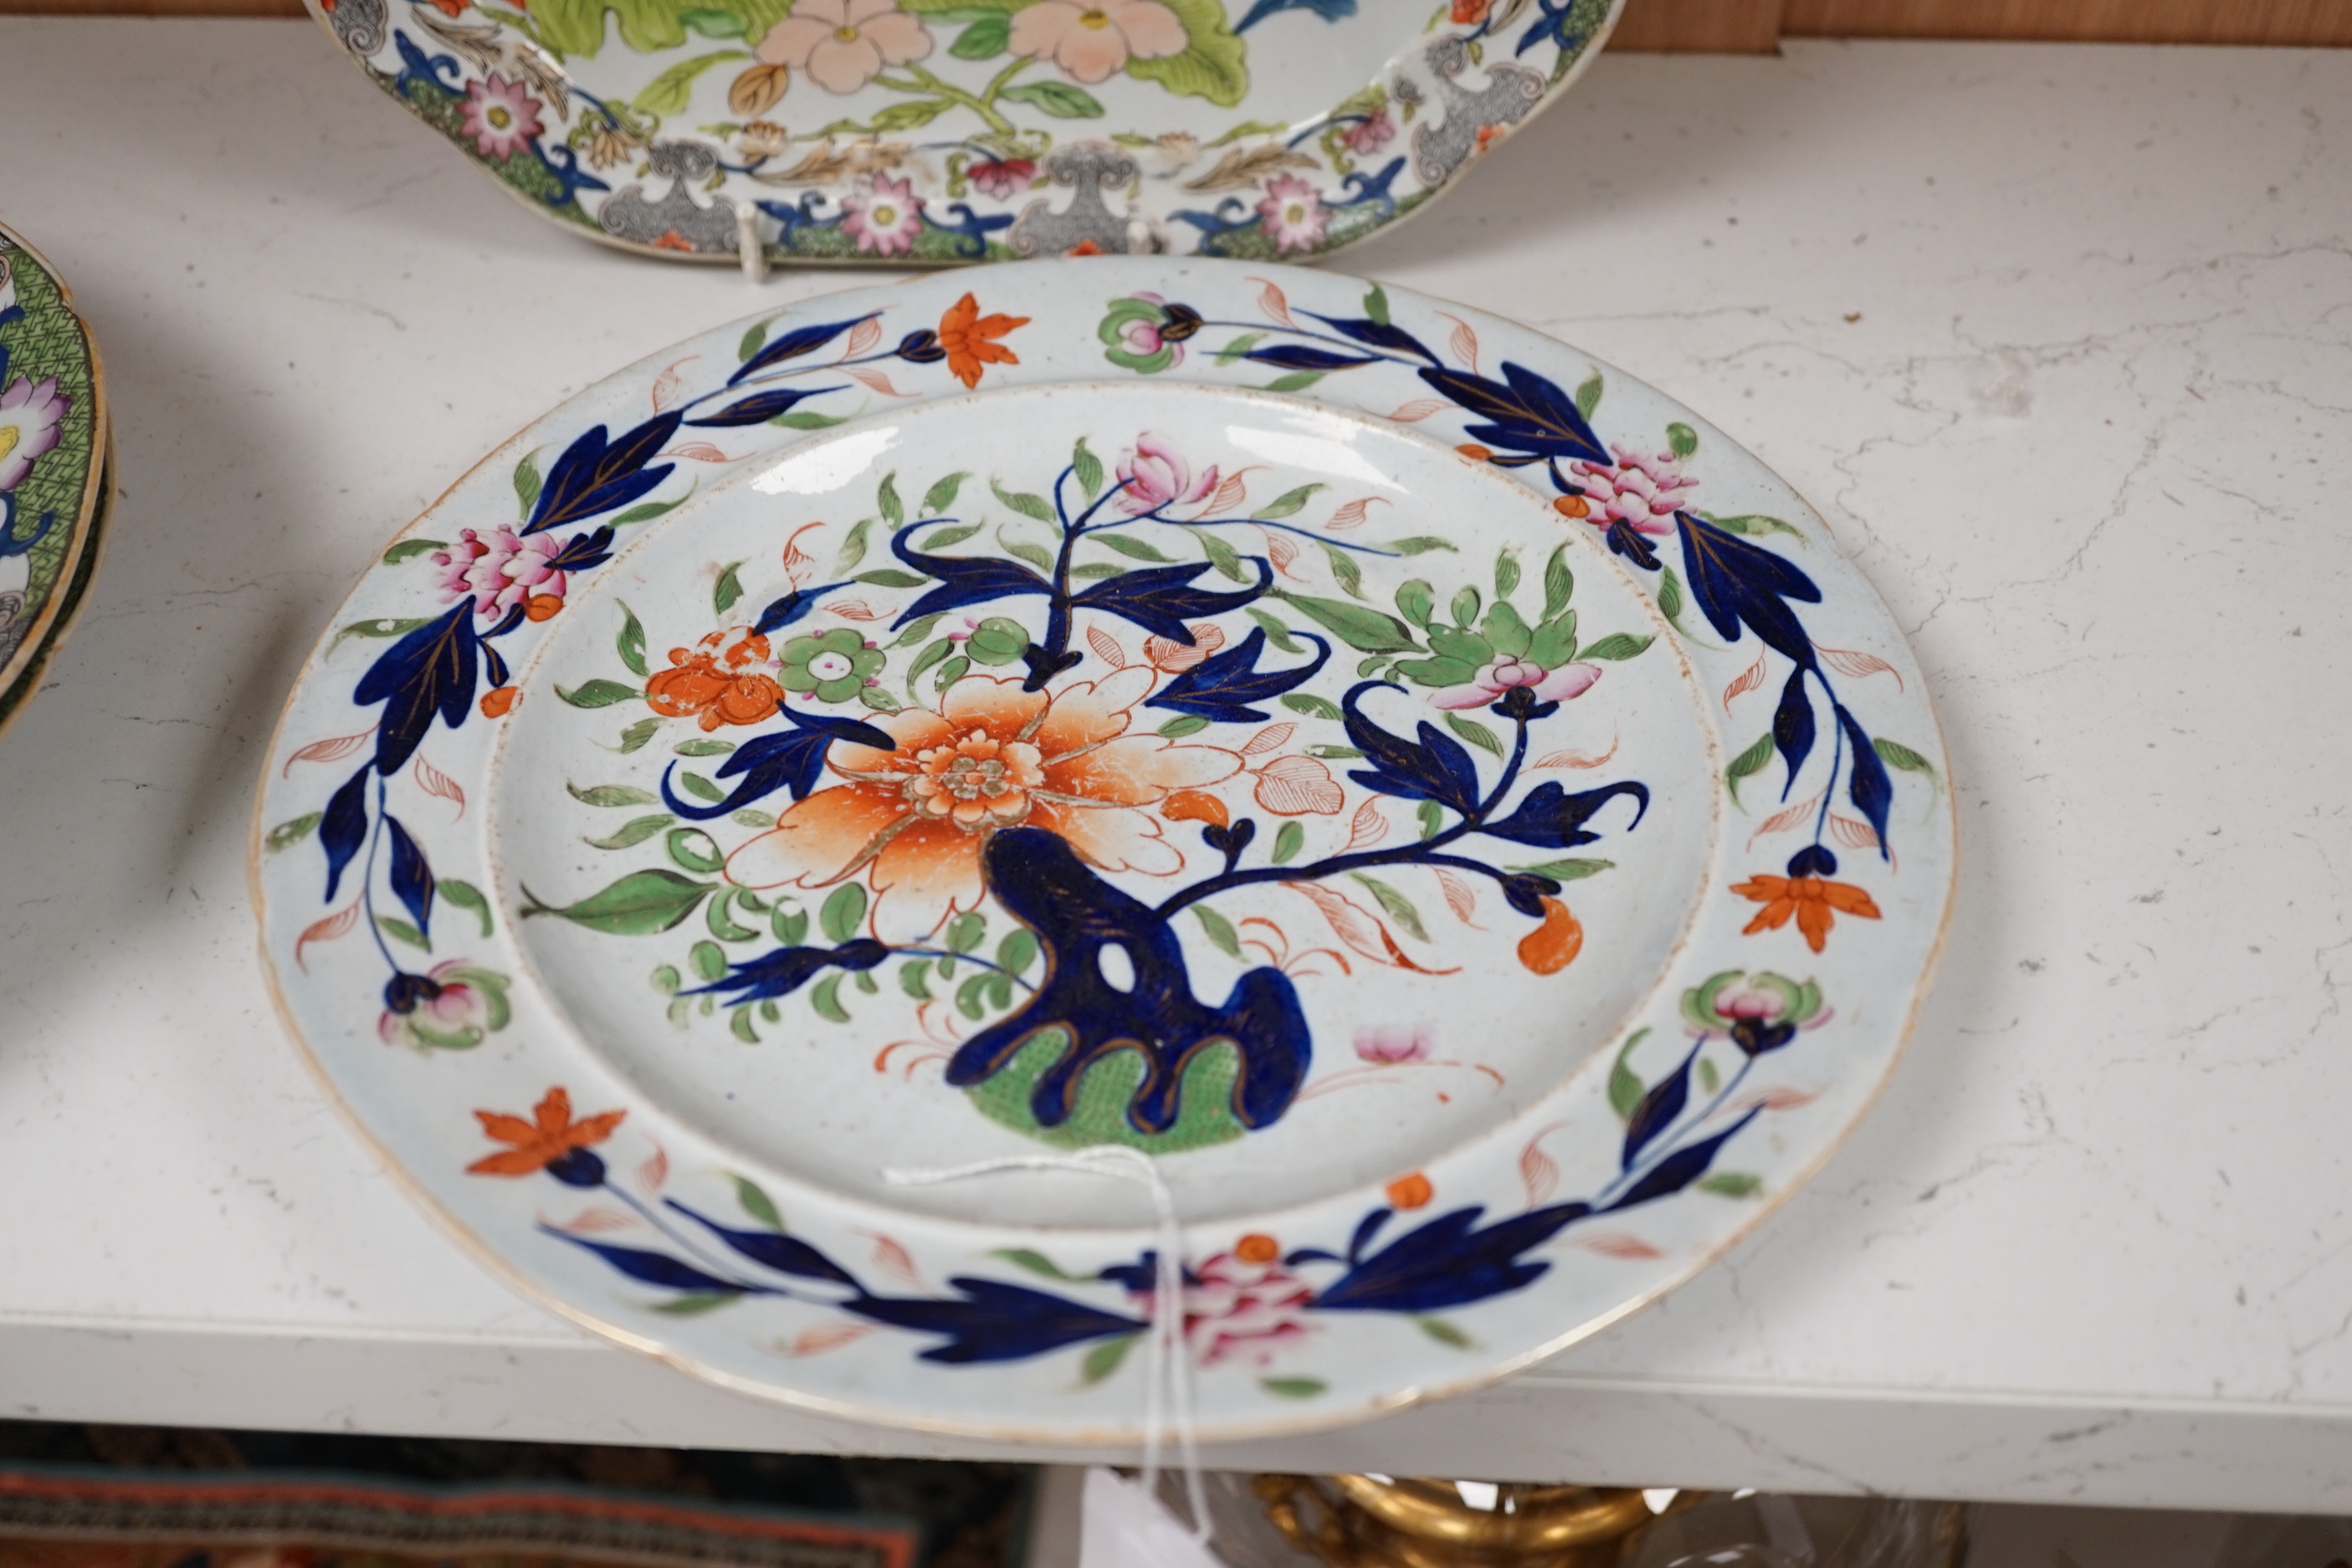 Four early 19th century ironstone dishes and a tureen together with a similar plate